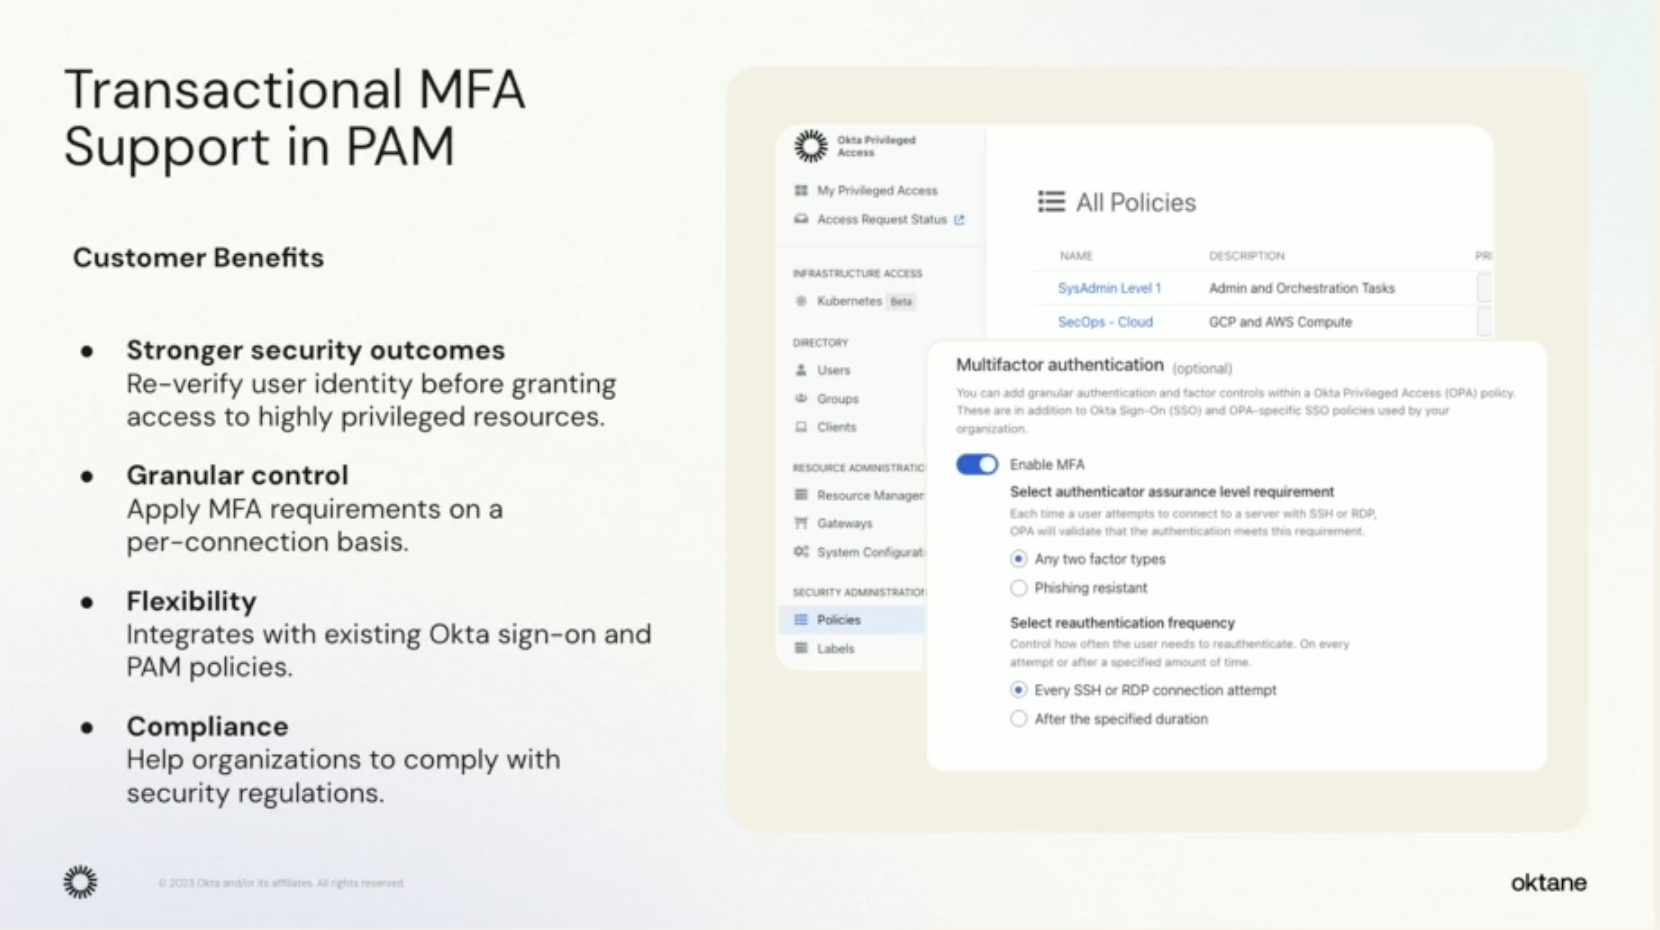 An image exhibiting transactional MFA support features in Okta's Privileged Access Management solution.